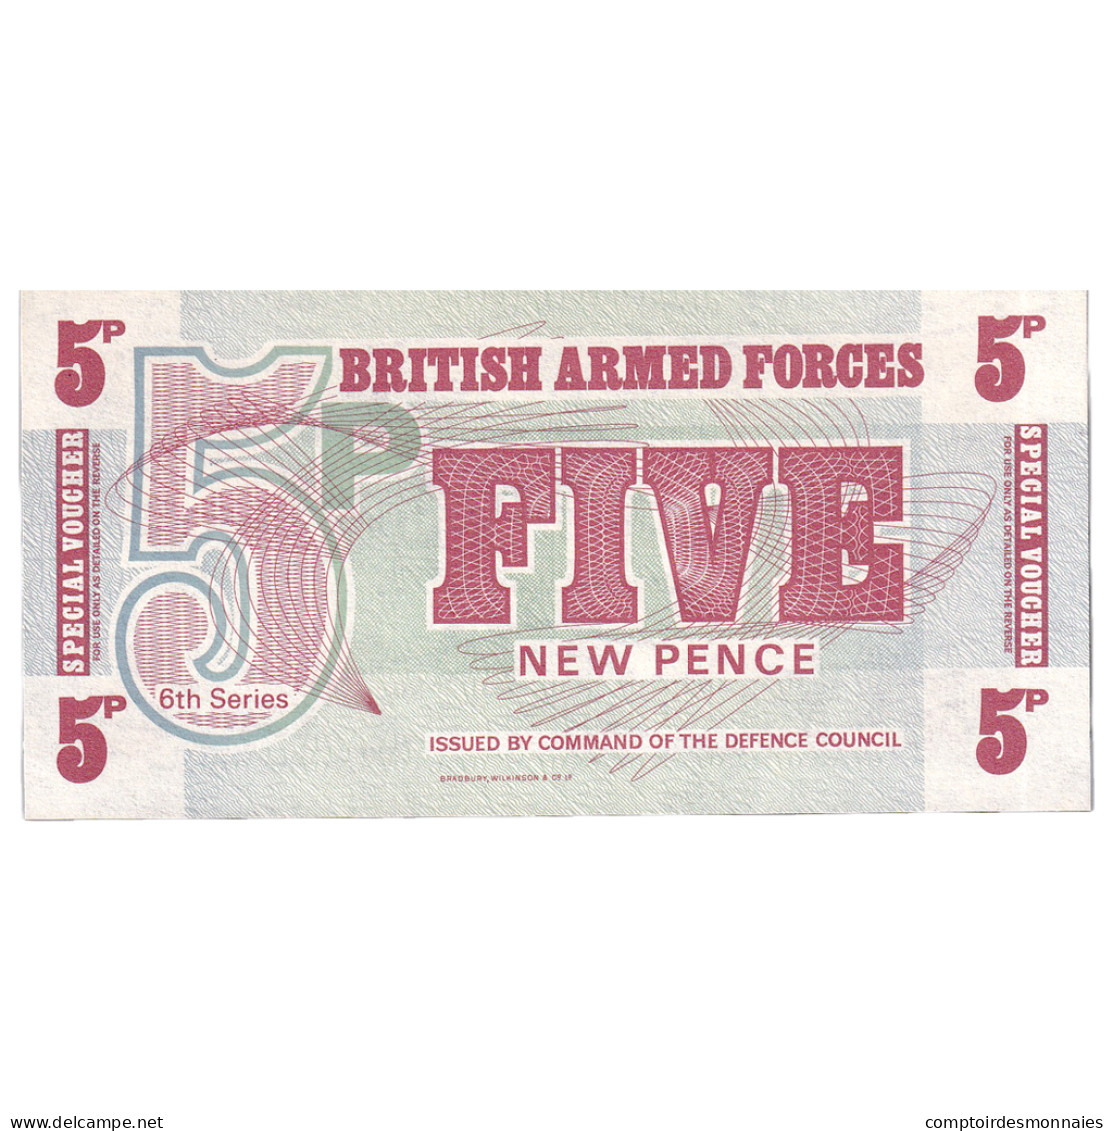 Billet, Grande-Bretagne, 5 New Pence, Undated (1972), KM:M47, NEUF - British Armed Forces & Special Vouchers